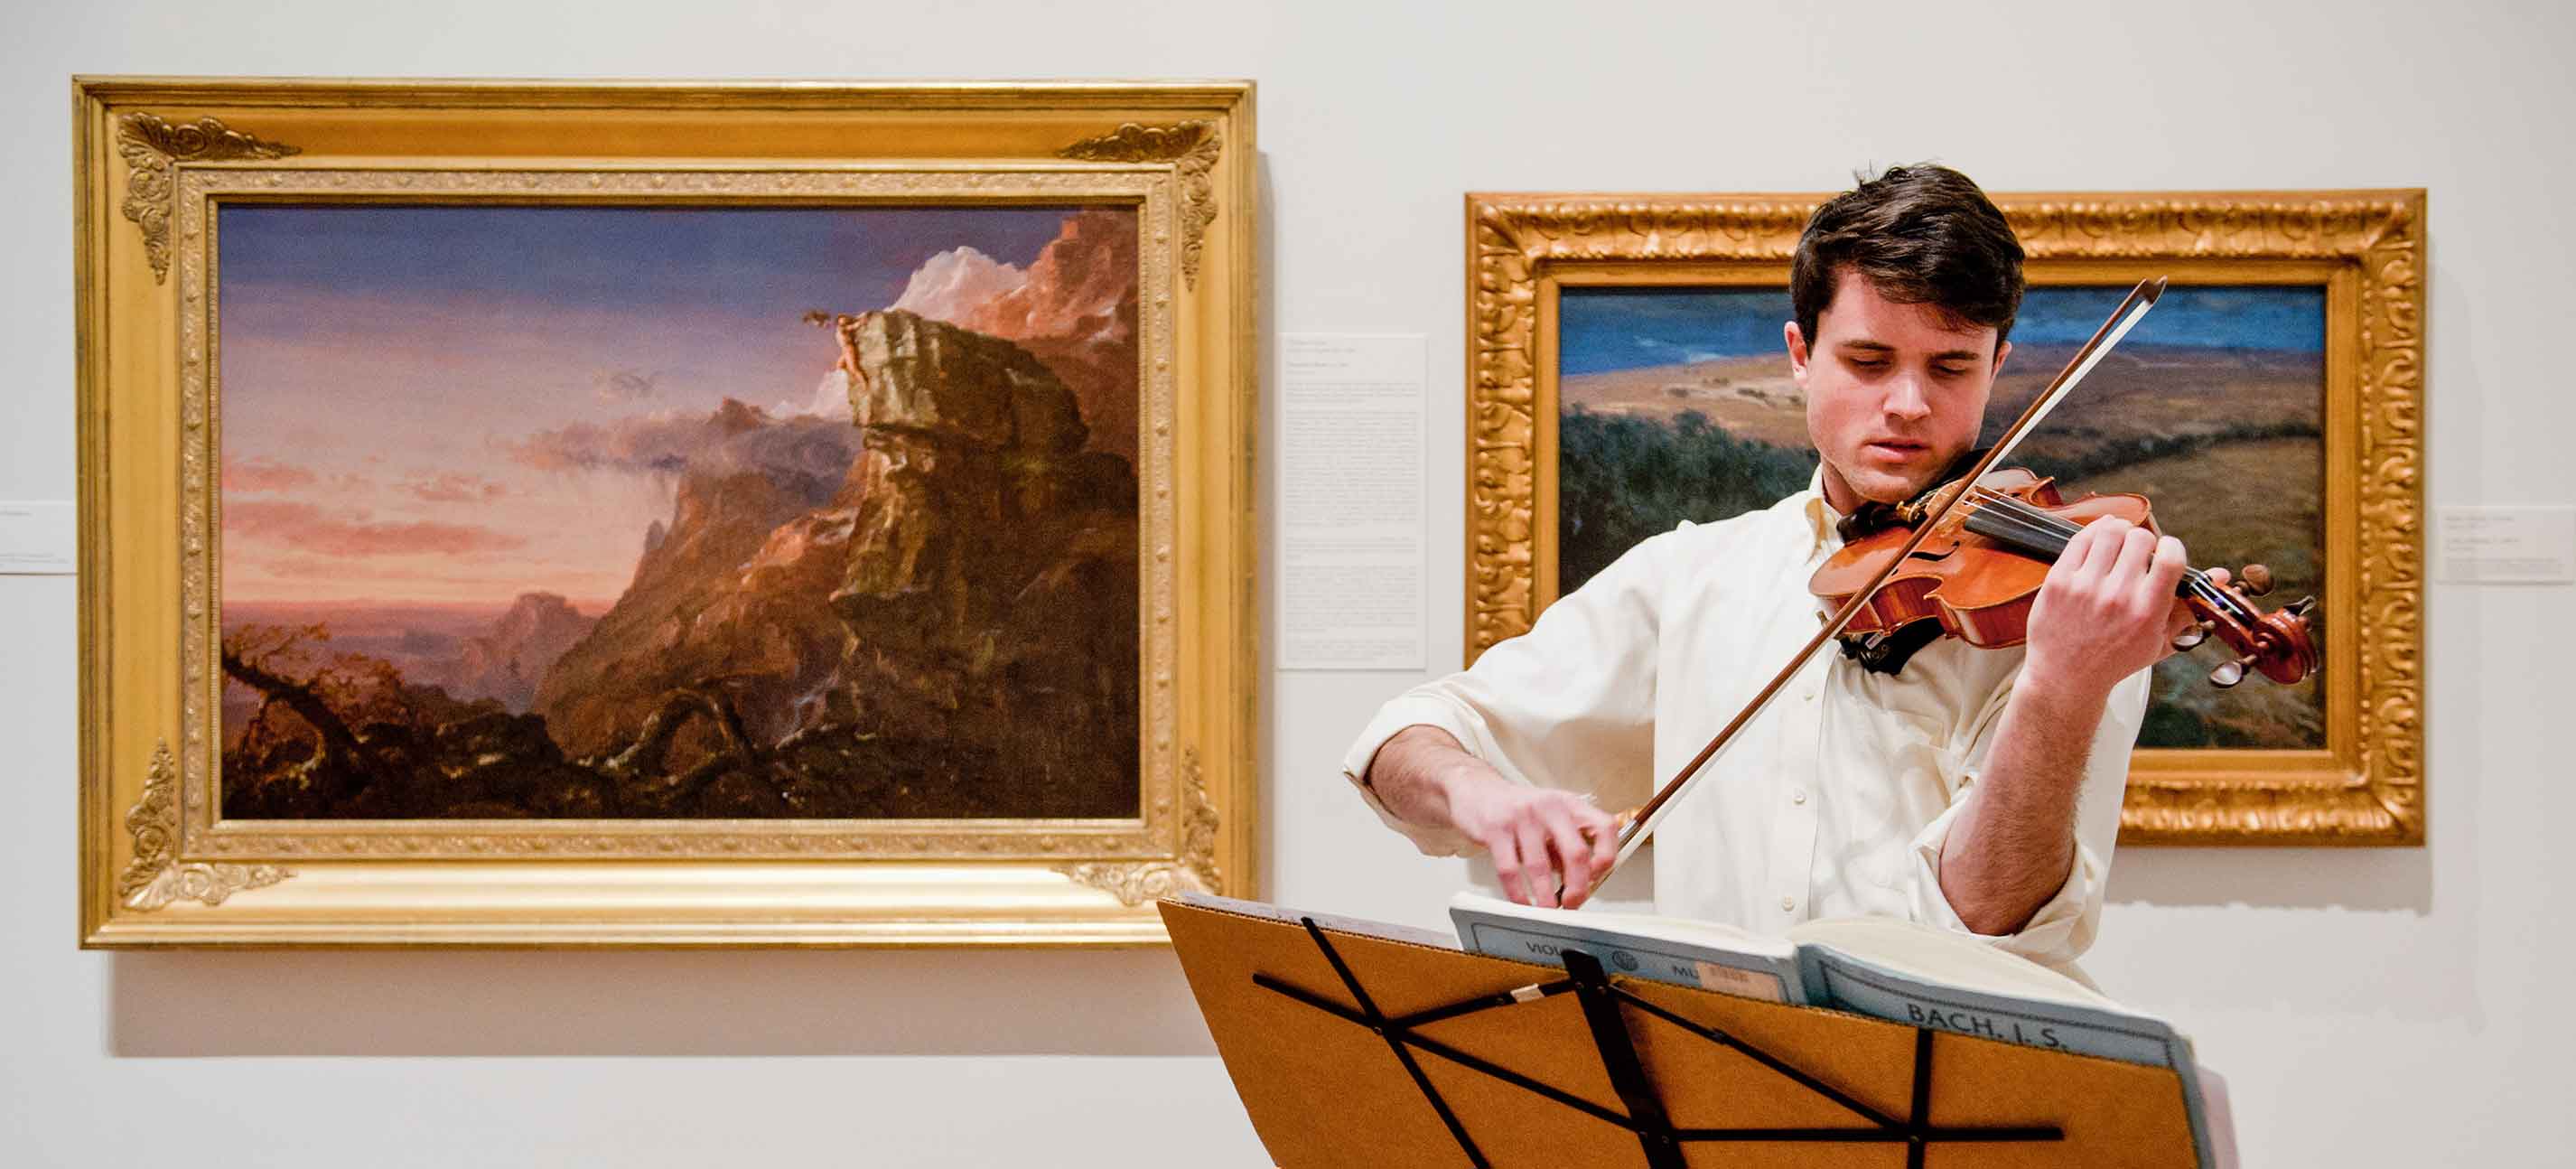 Person playing violin in the Frances Lehman Loeb Art Gallery